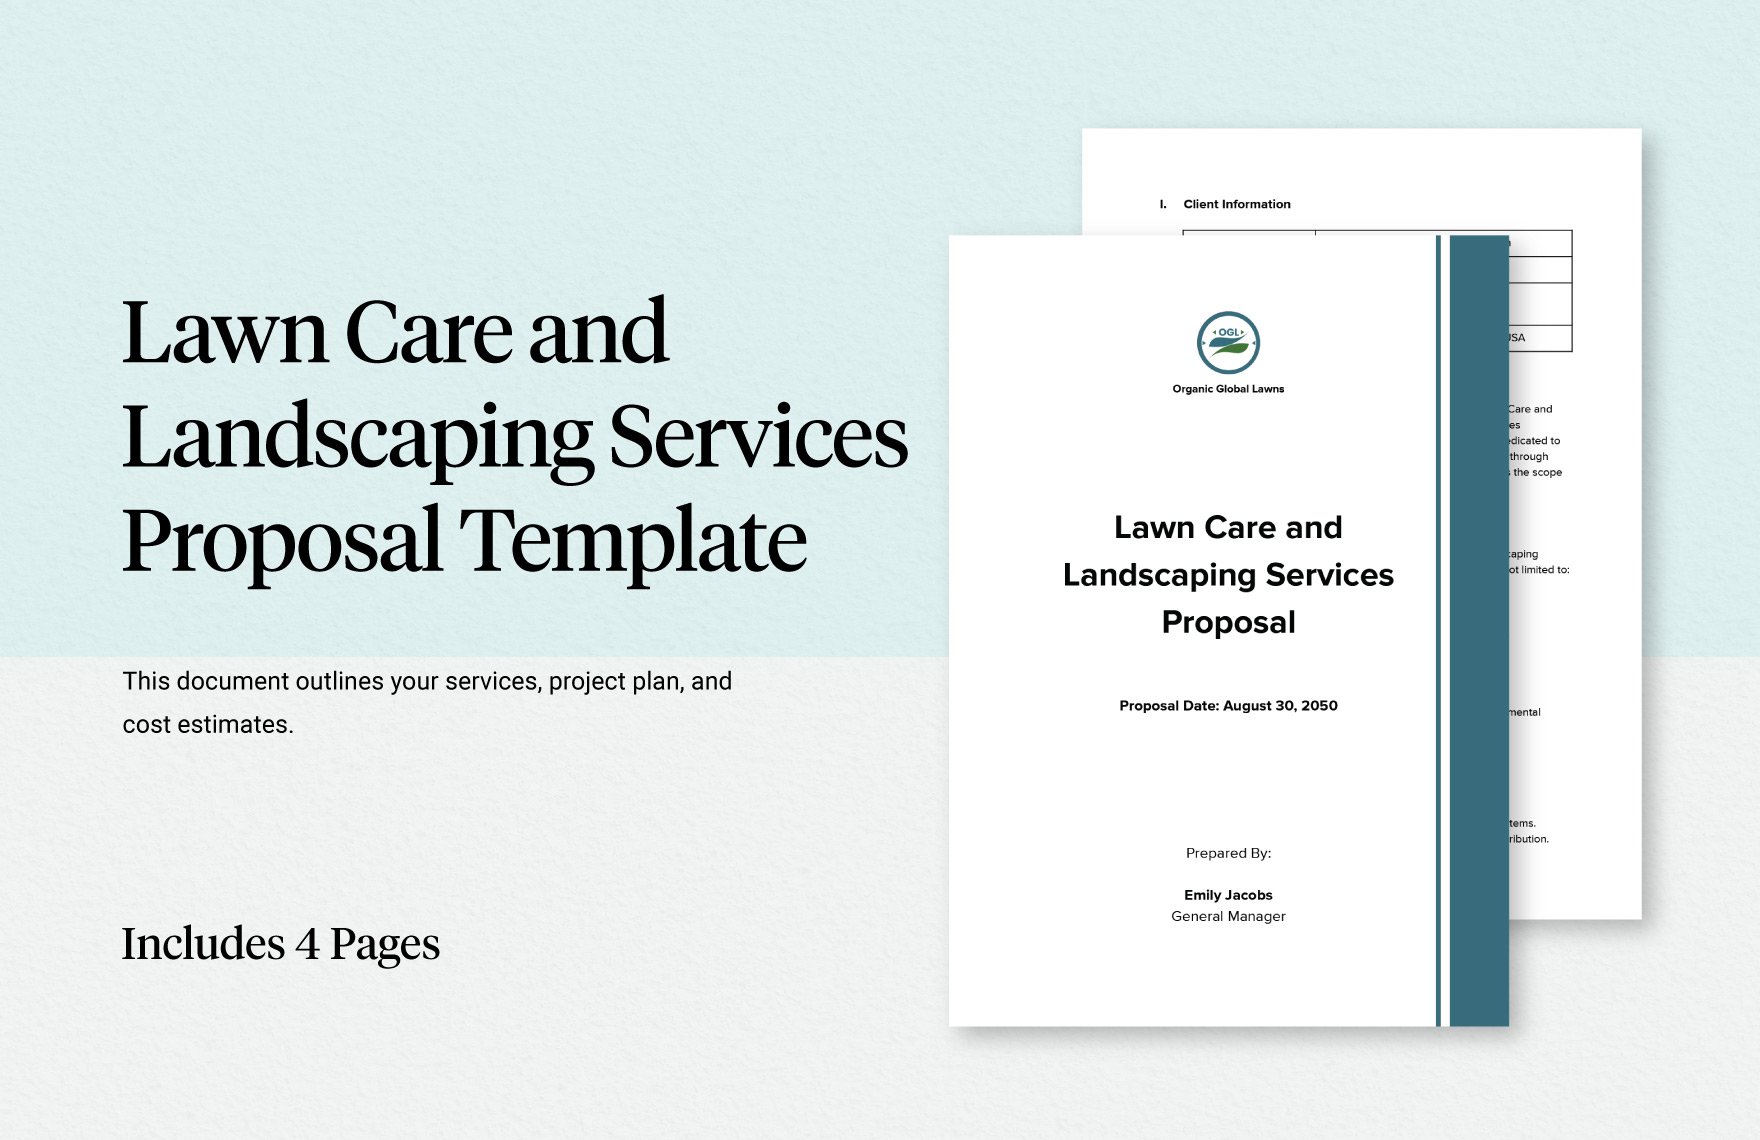 Lawn Care and Landscaping Services Proposal Template